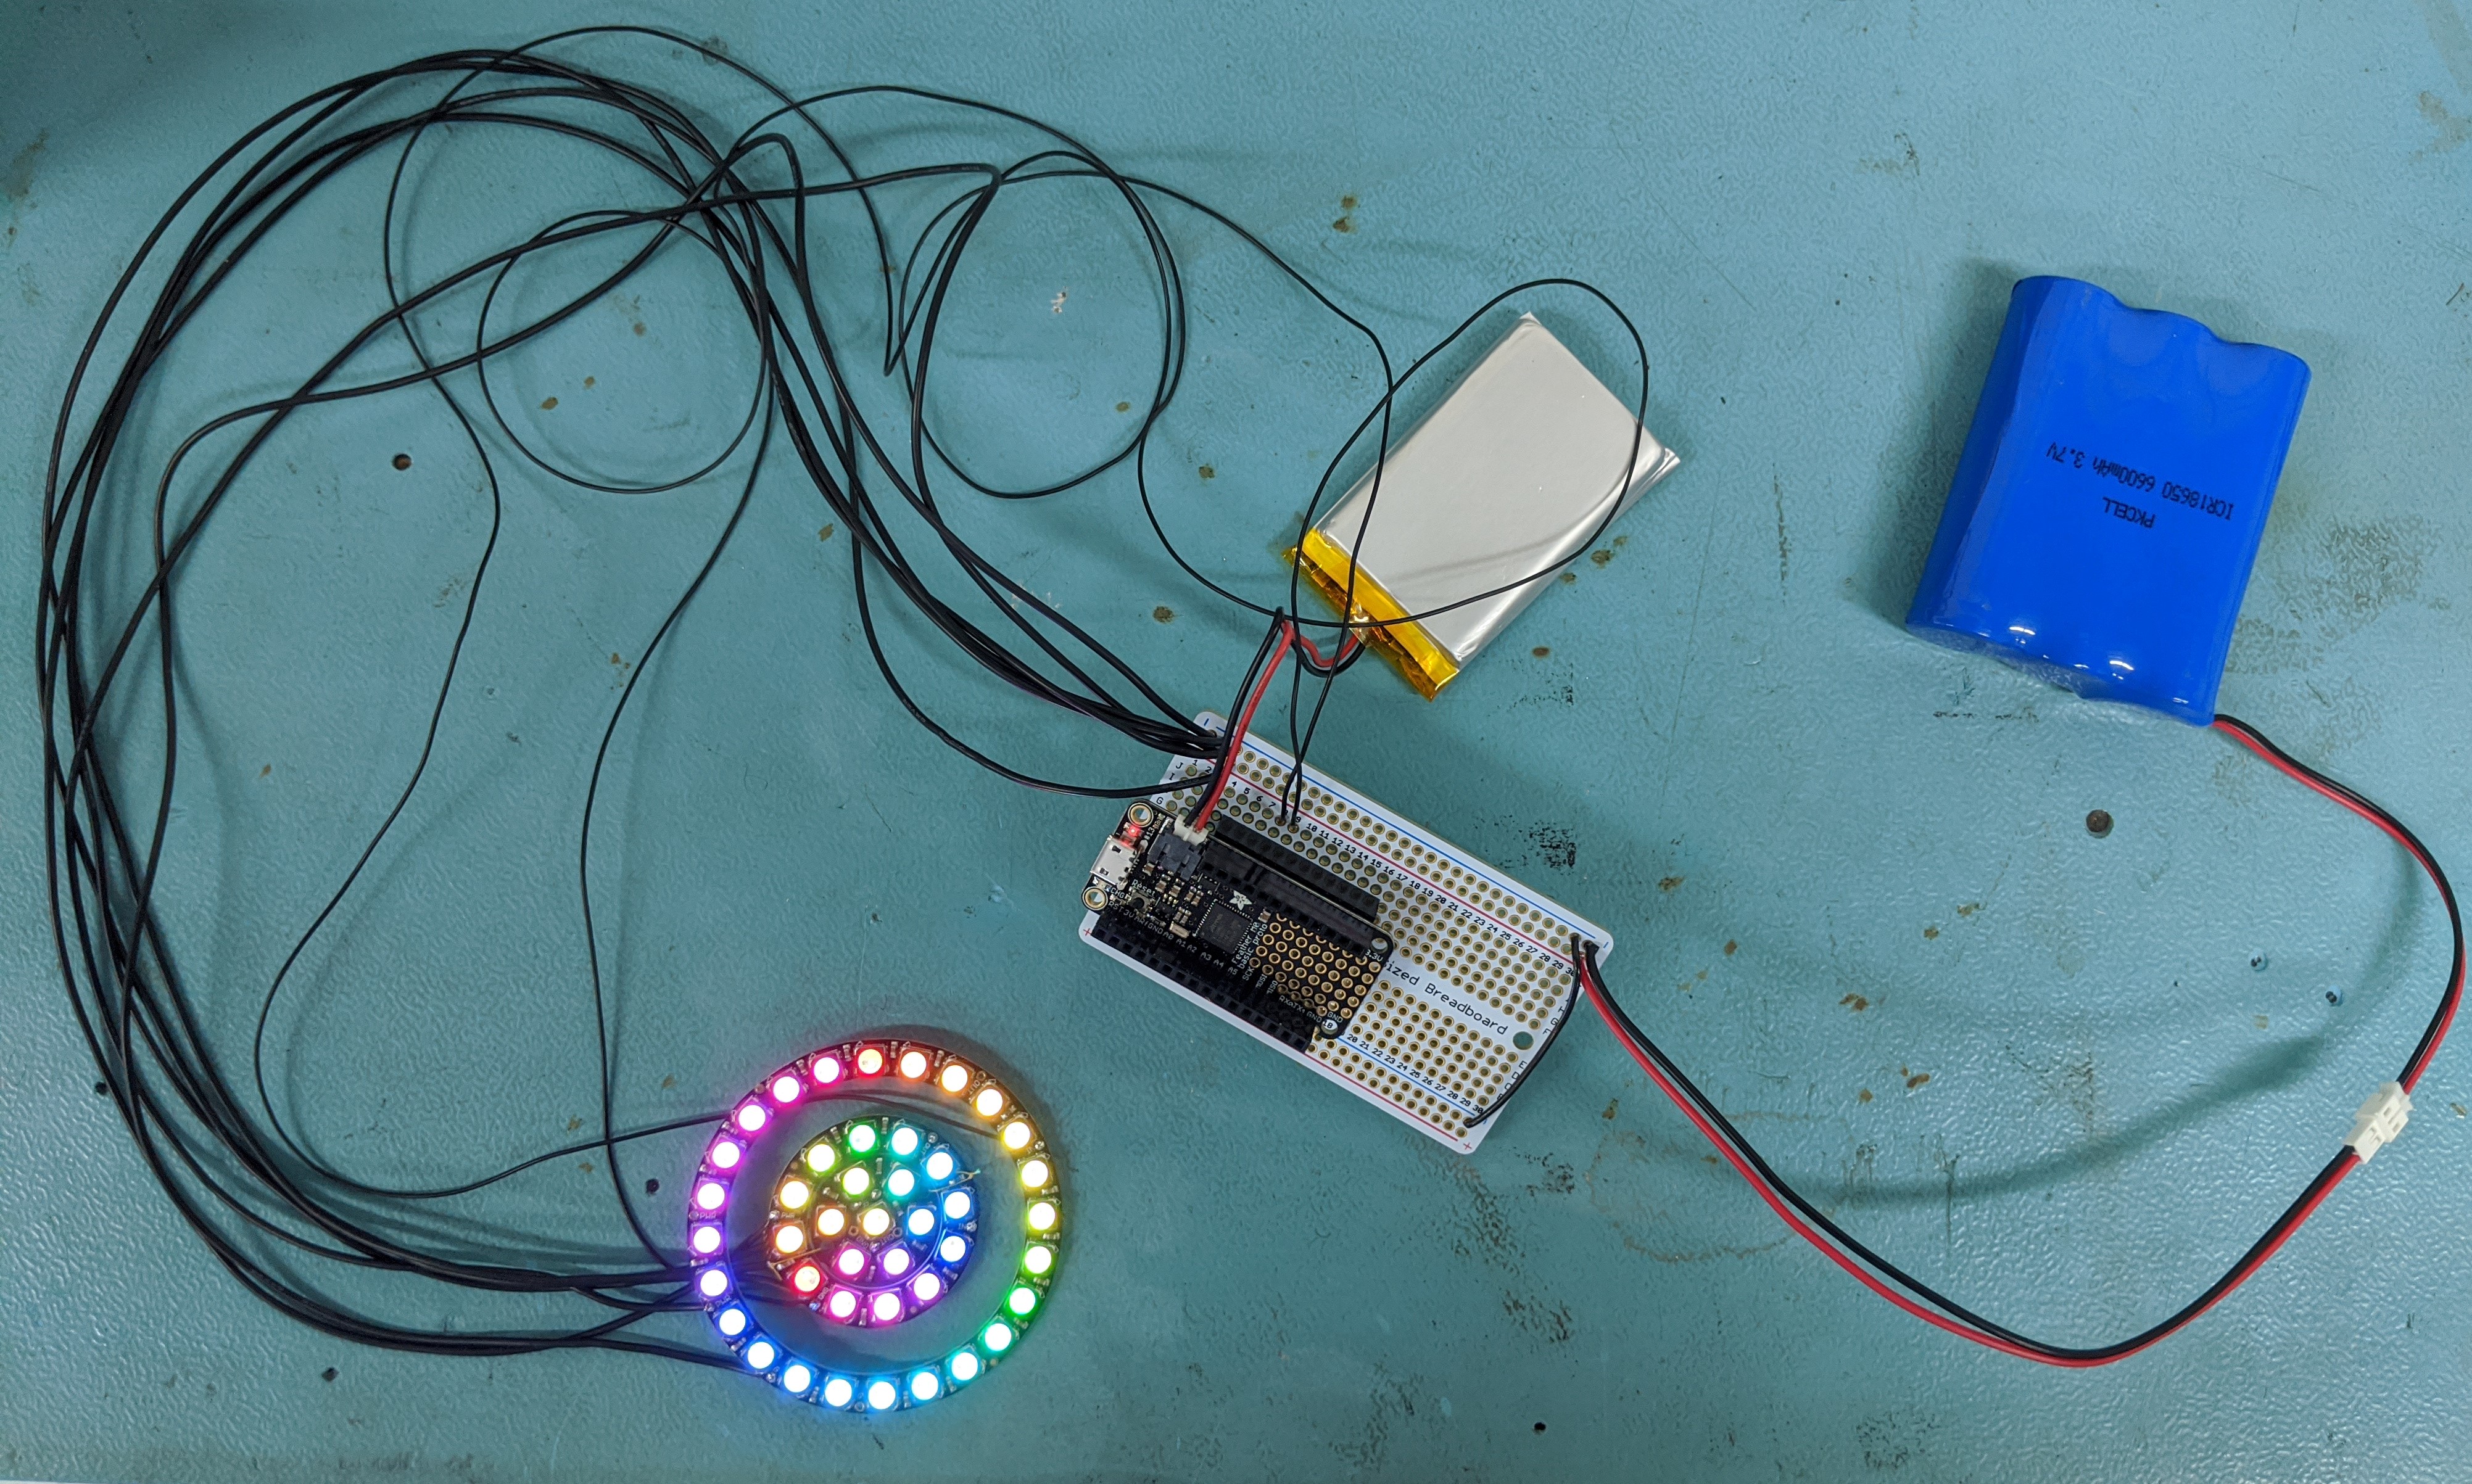 A picture of the LED rings wired to the microcontroller